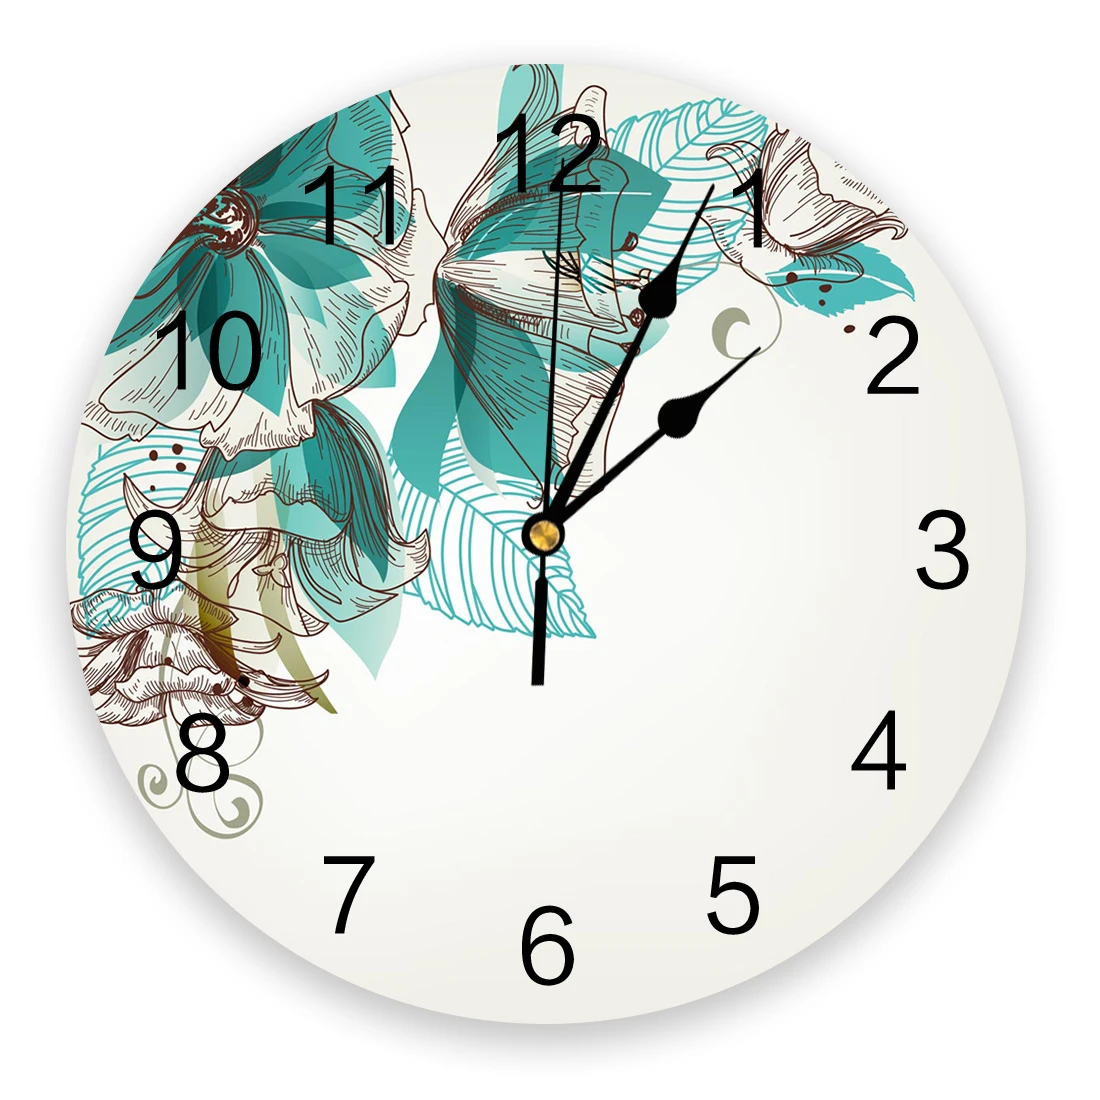 PVC Wall Clock Watercolor Green Flowers Leaves I Modern Wall Clock Silent Non-Ticking Battery Operated Home Office Decor 10 Inch Made in USA 